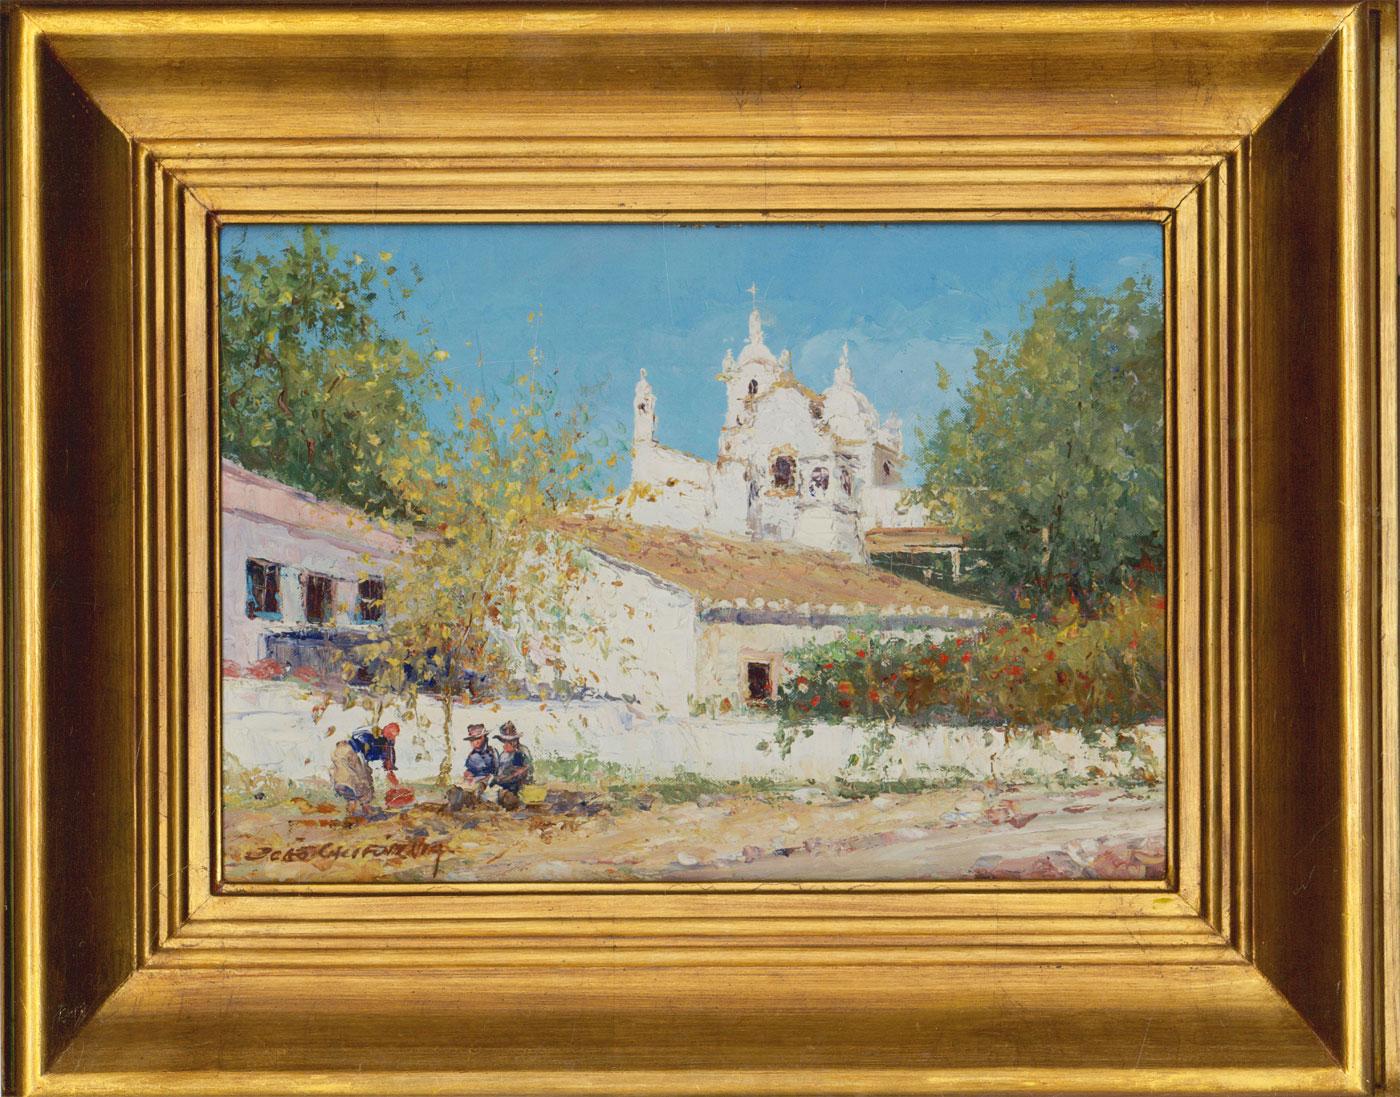 Unknown Landscape Painting - Joao California - Signed & Framed 20th Century Oil, South American View